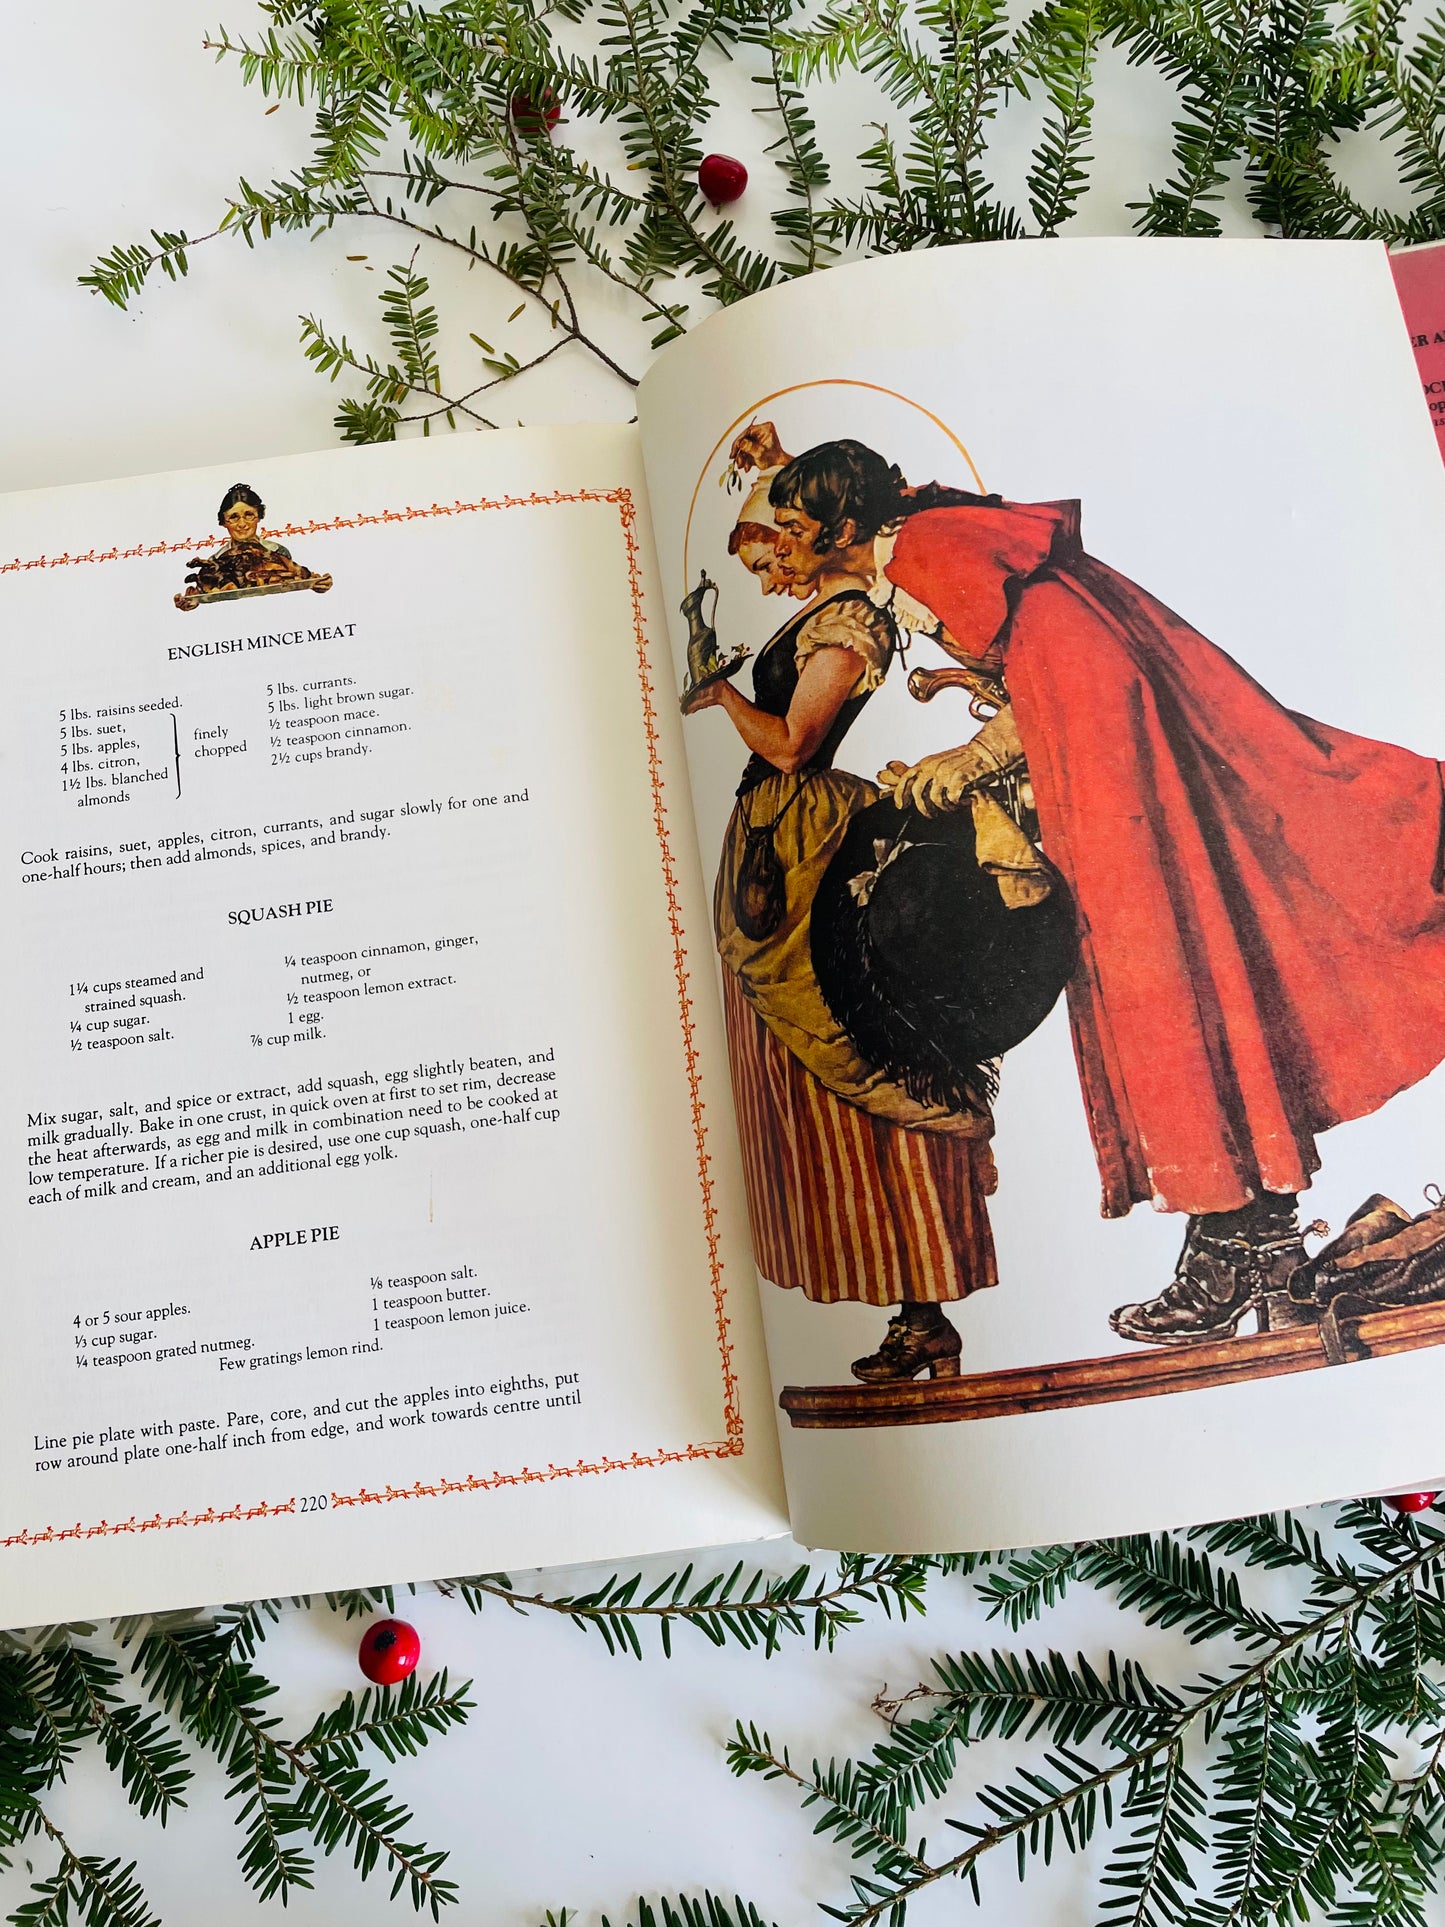 Norman Rockwell's Christmas Book - Hardcover - Carols, Stories, Poems, & Recollections (1977)